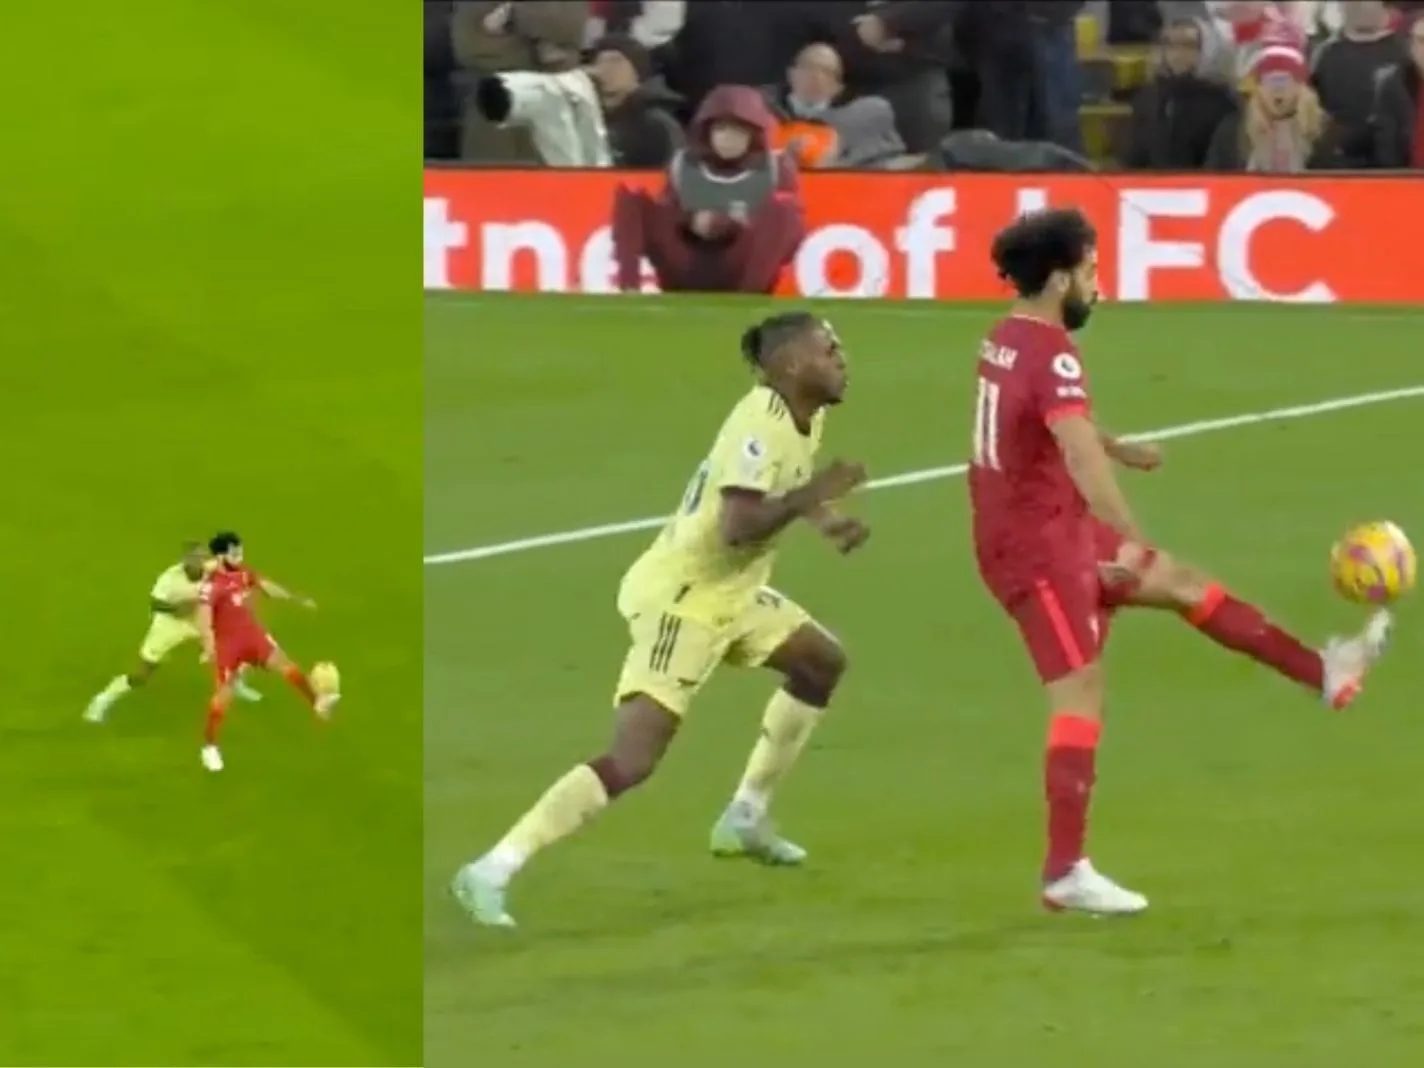 Mohamed Salah immaculate first touch and control against Arsenal